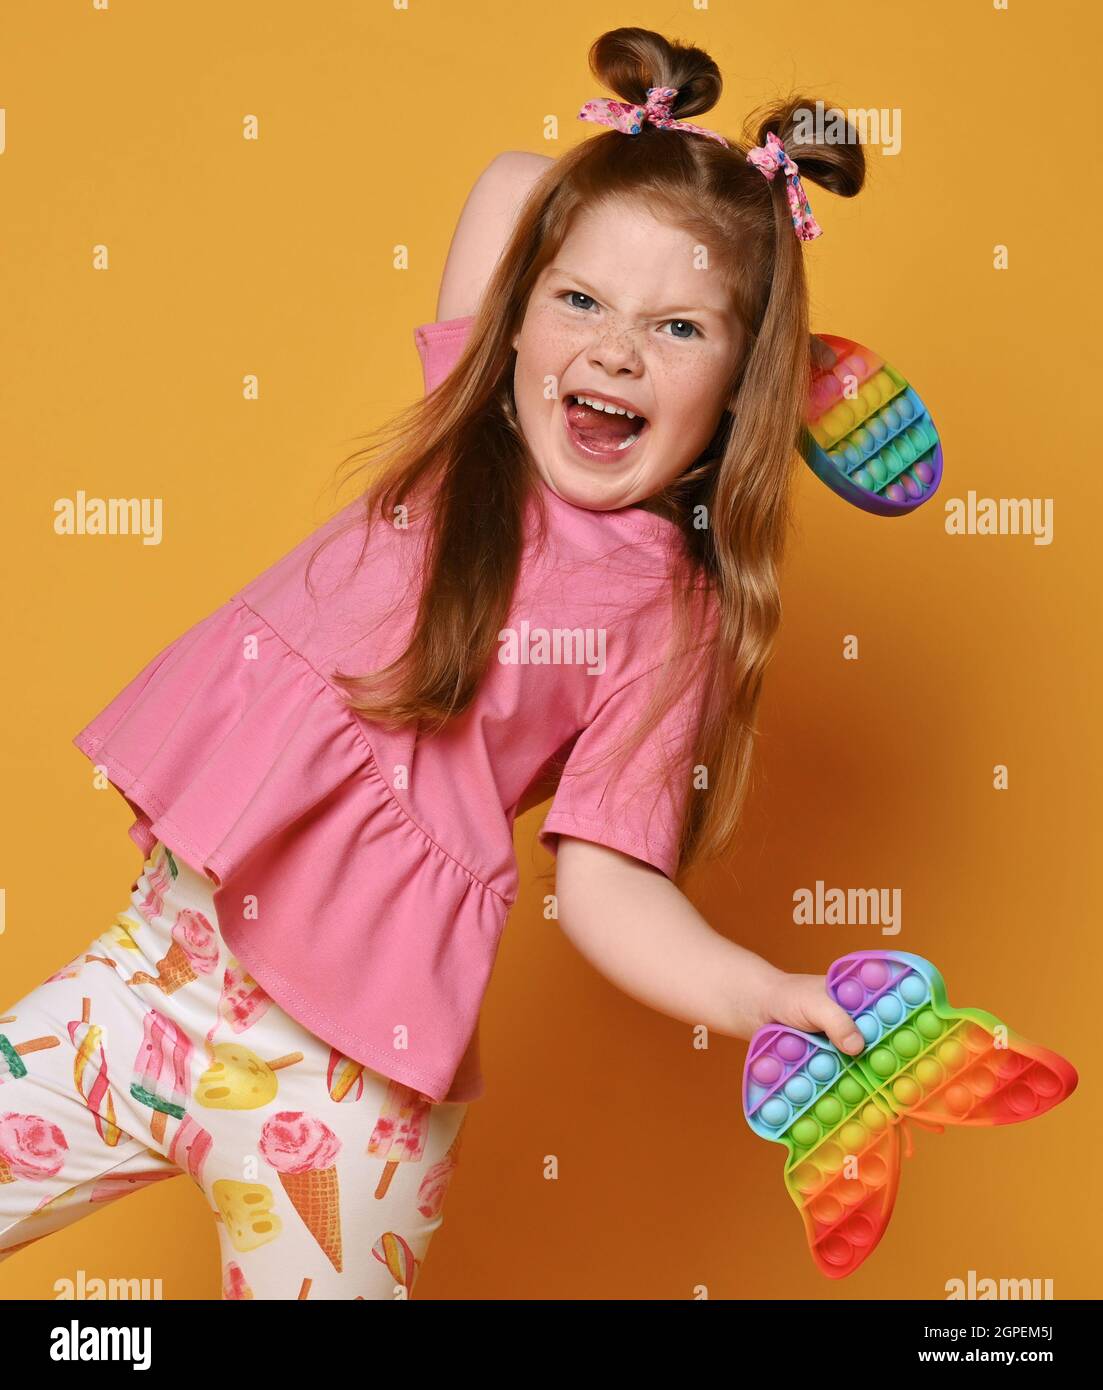 Frolic, active kid girl in colorful clothes plays with two sensory rainbow color toys - pop it in hands Stock Photo